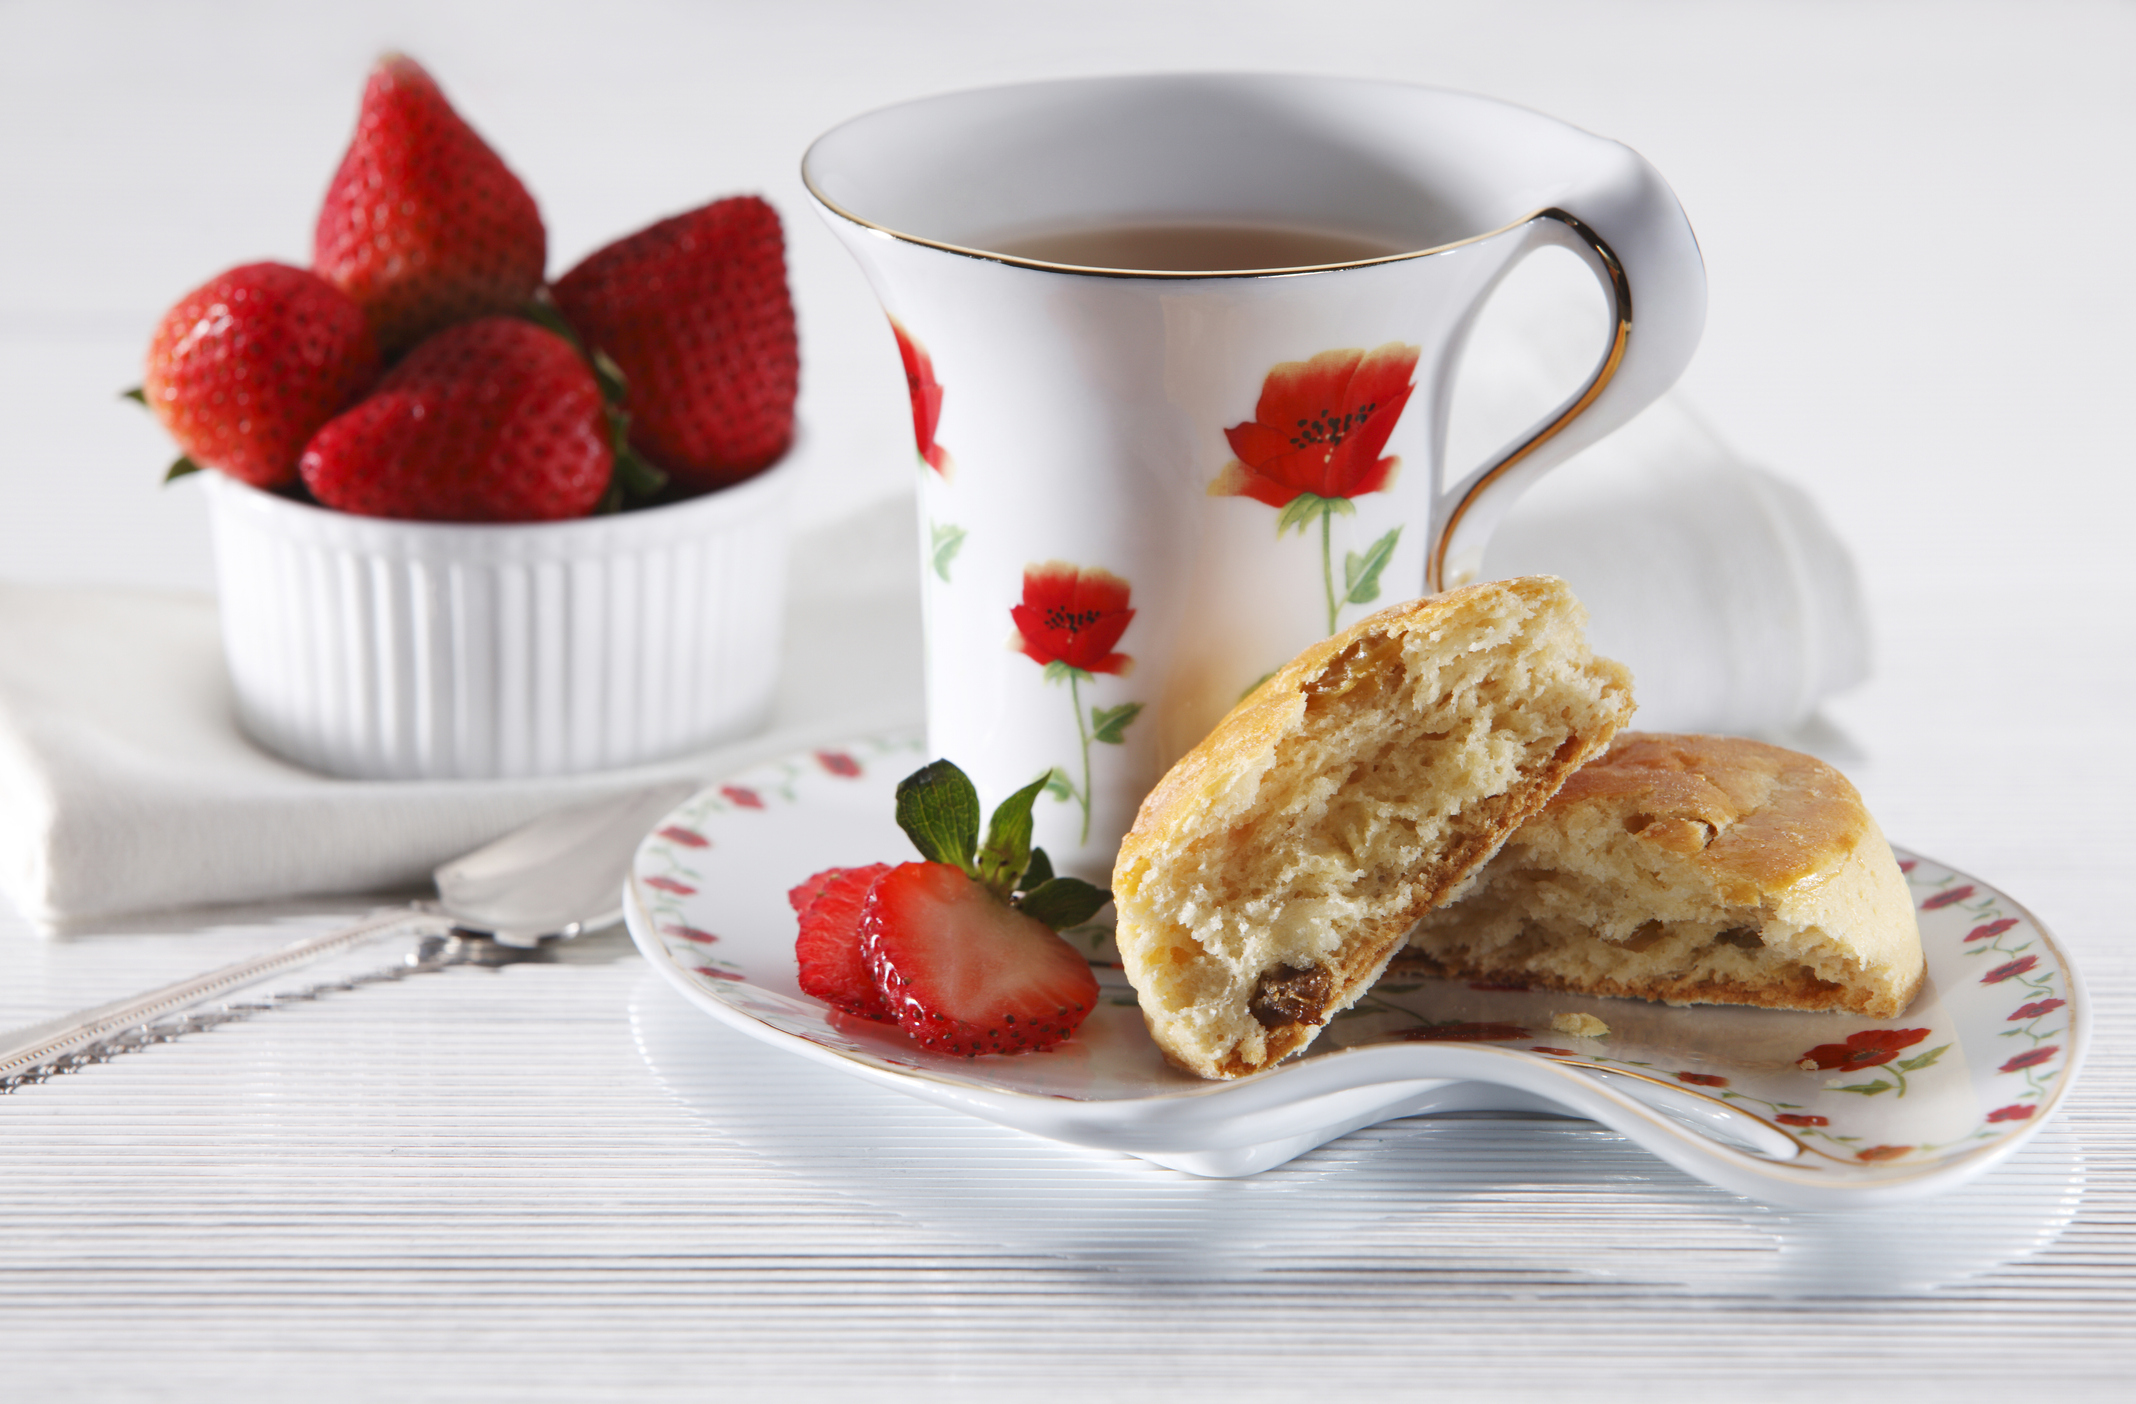 Fresh strawberries in a white dish next to a strawberry-themed teacup and a scone sitting on a white dish.